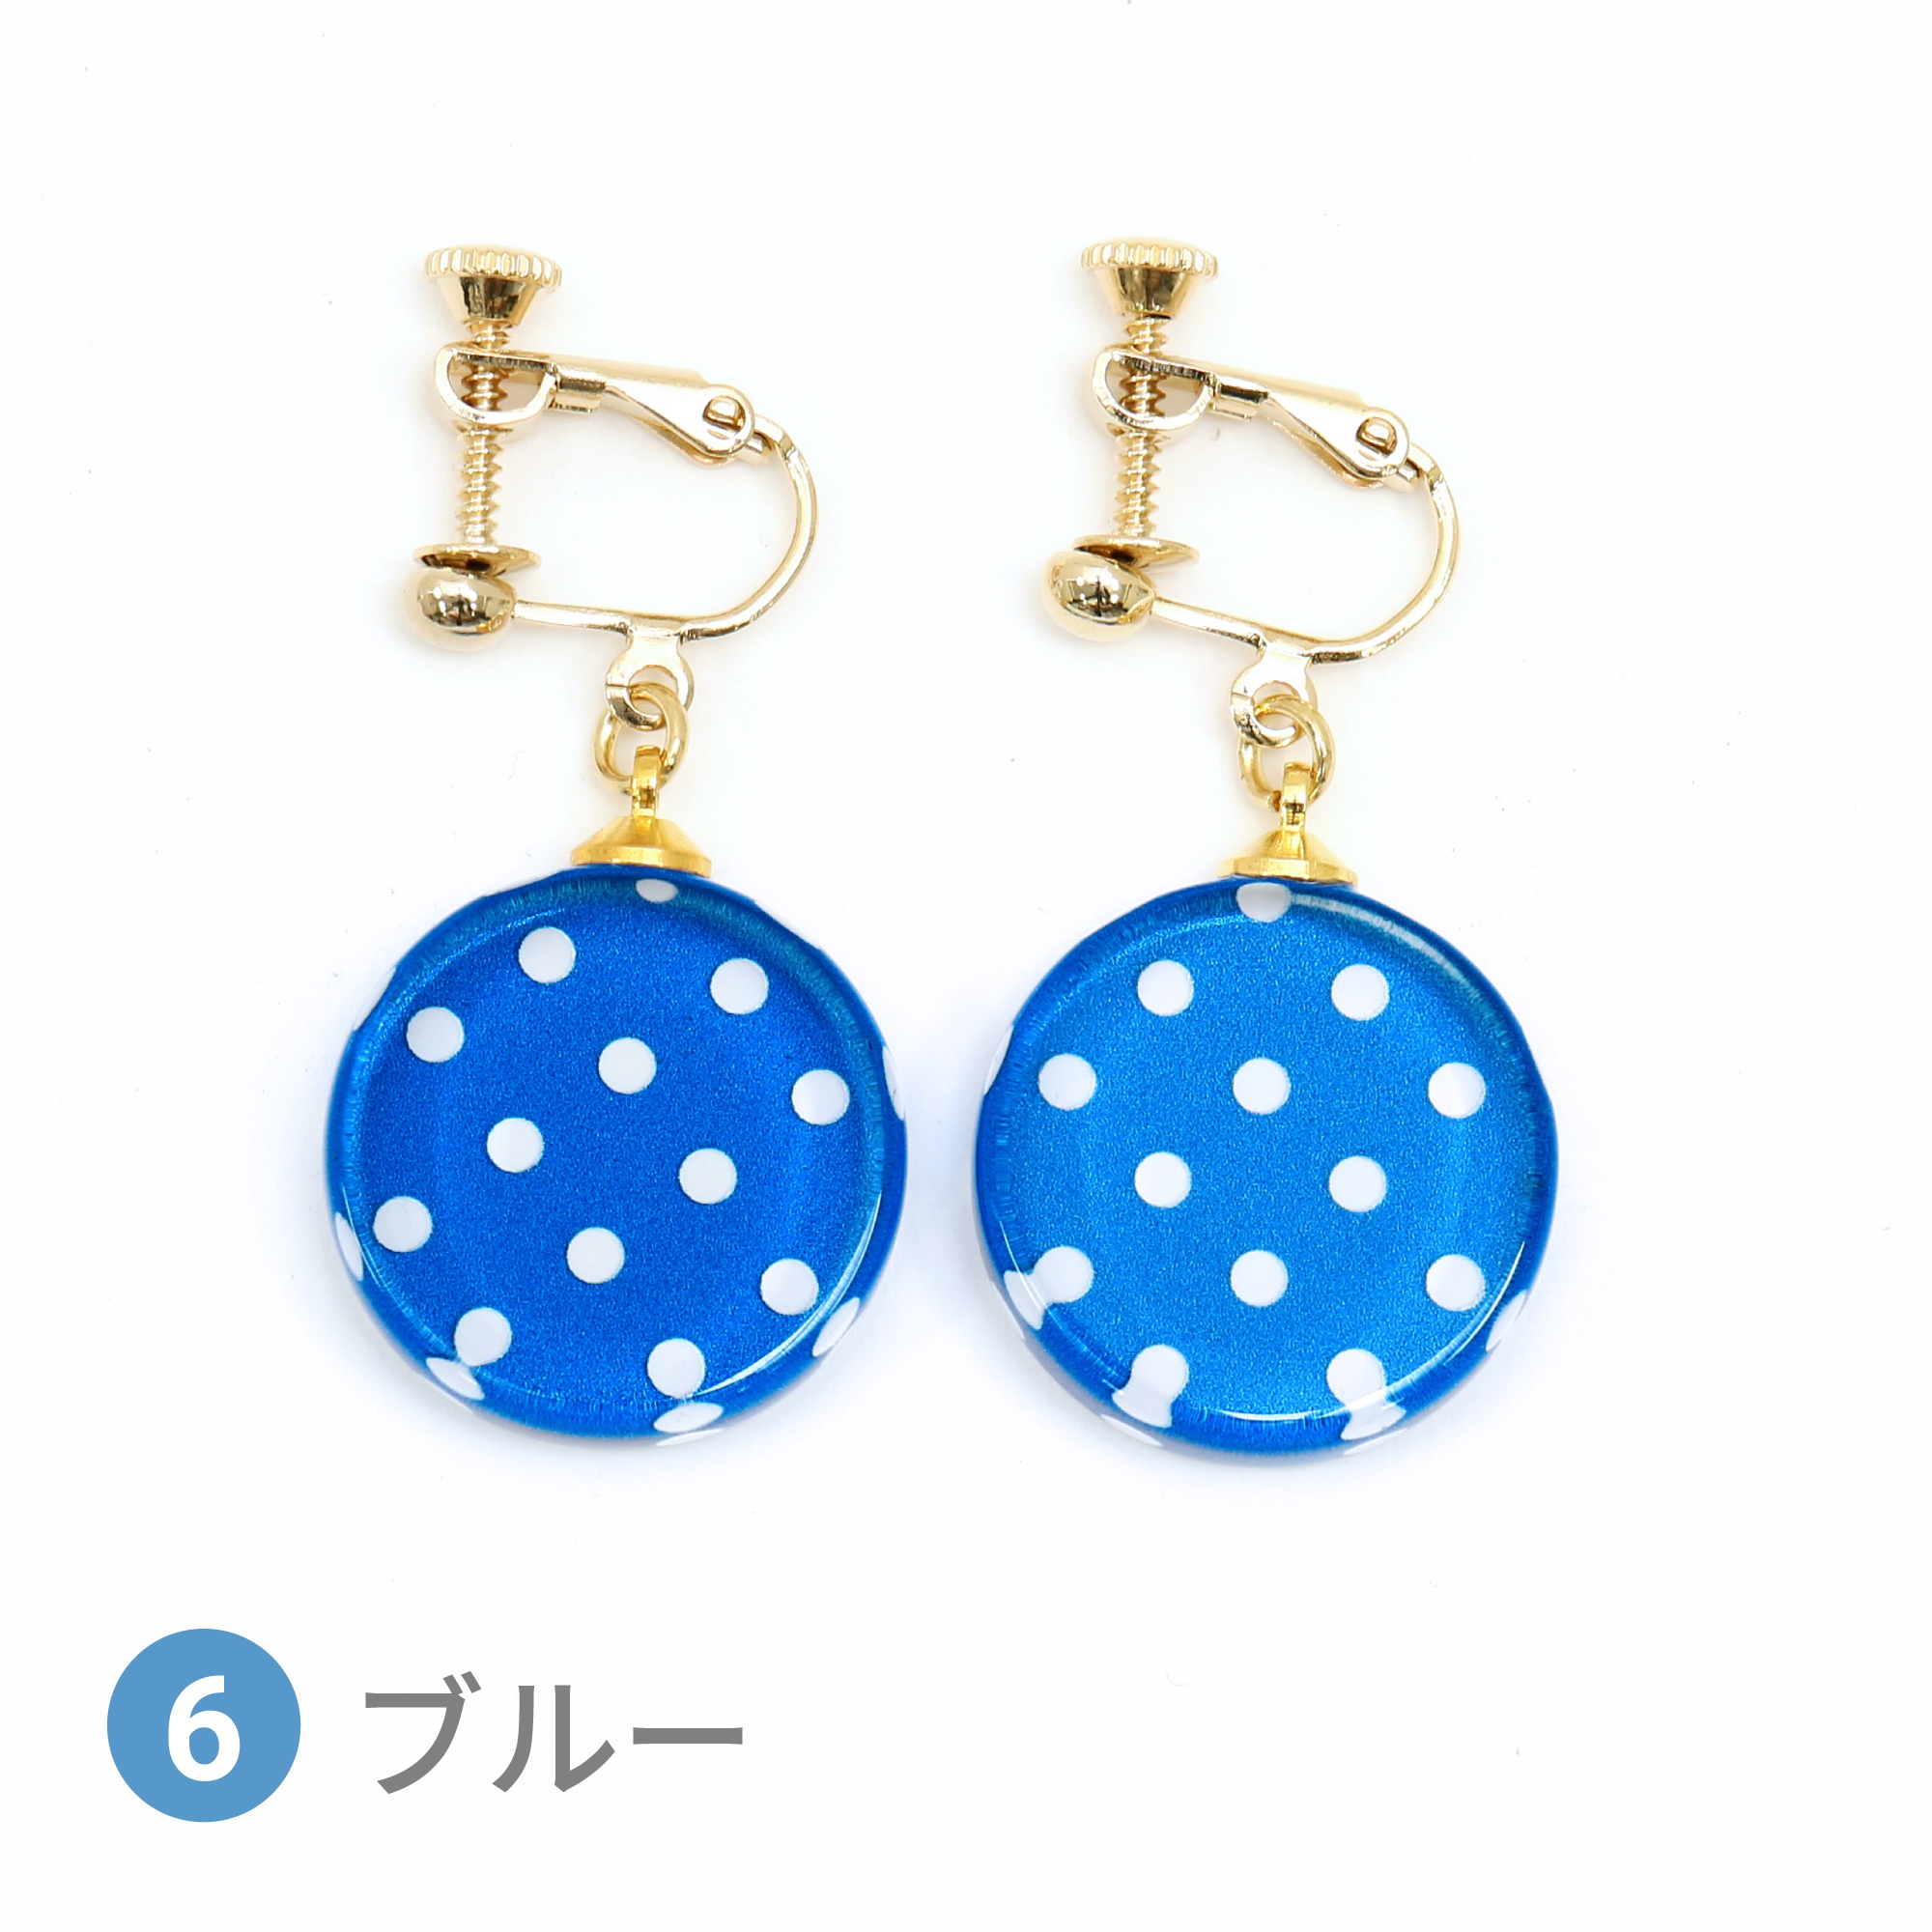 Glass accessories Earring DOT blue round shape